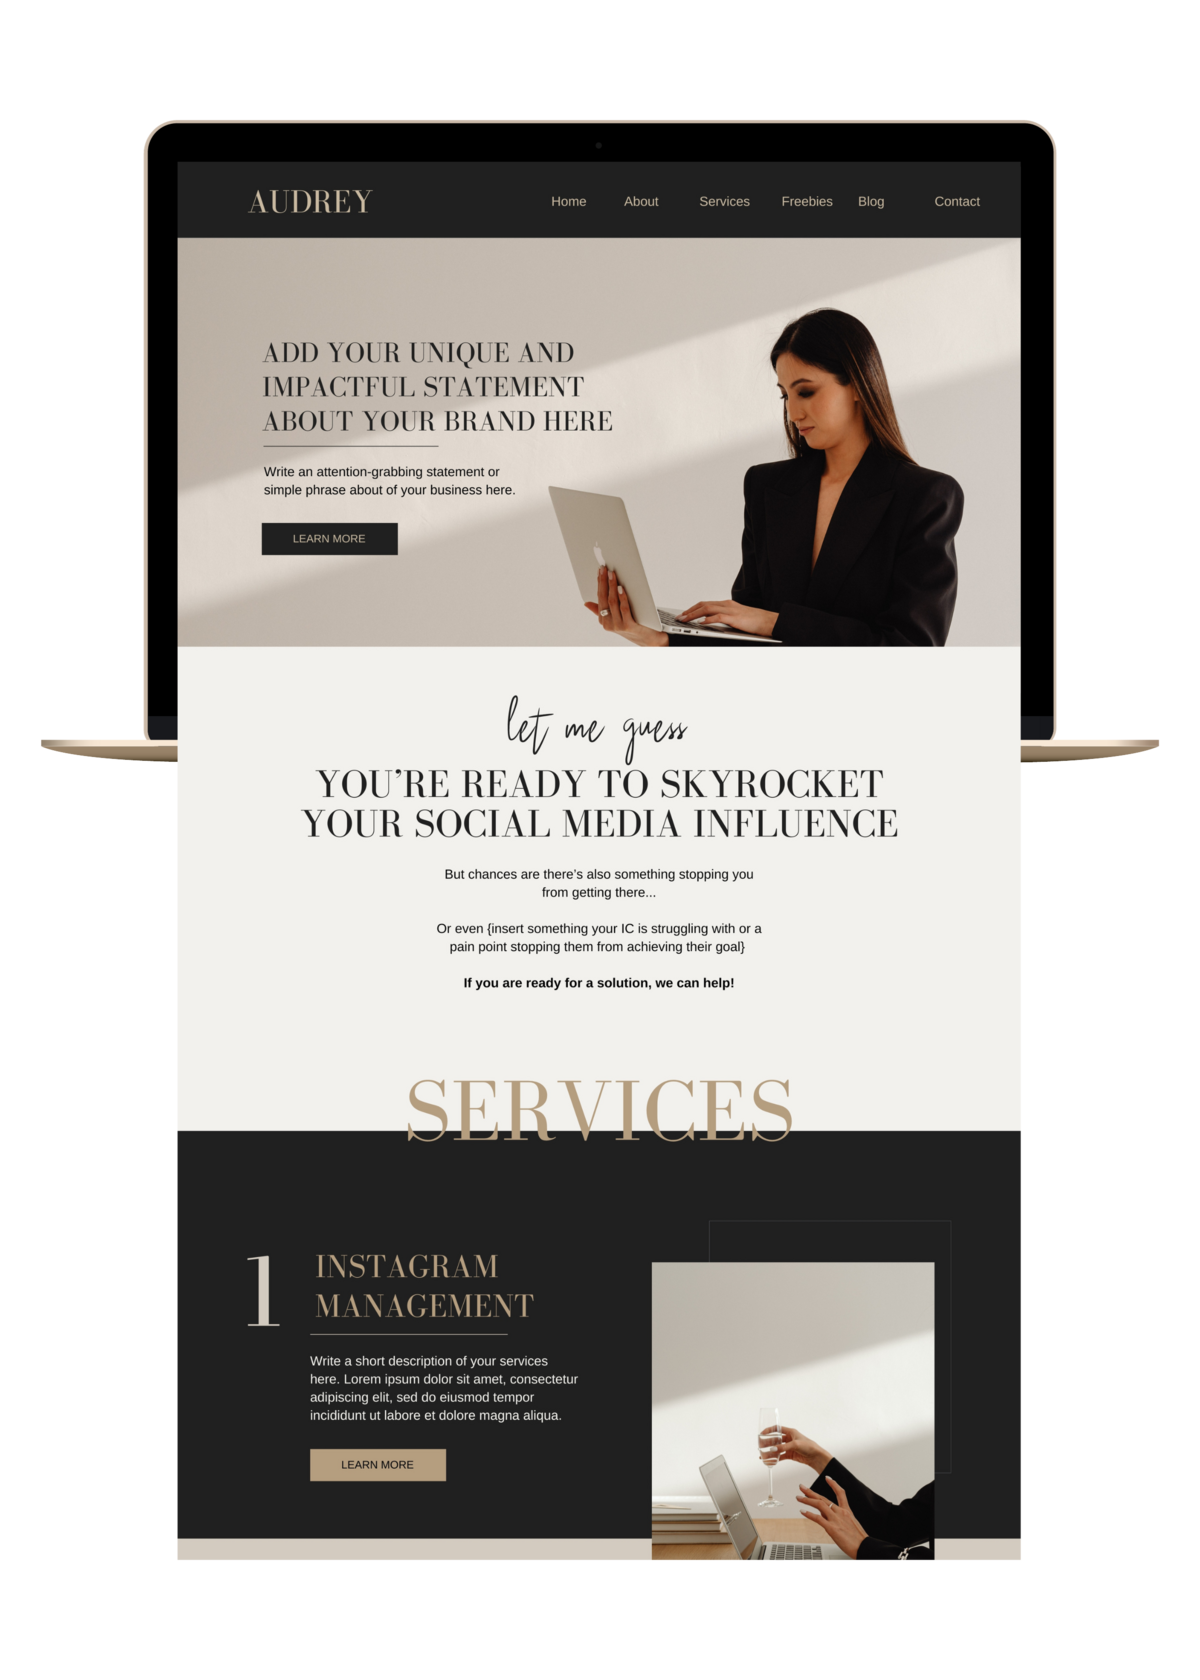 Audrey-Blake-showit-website-template-for-service-providers